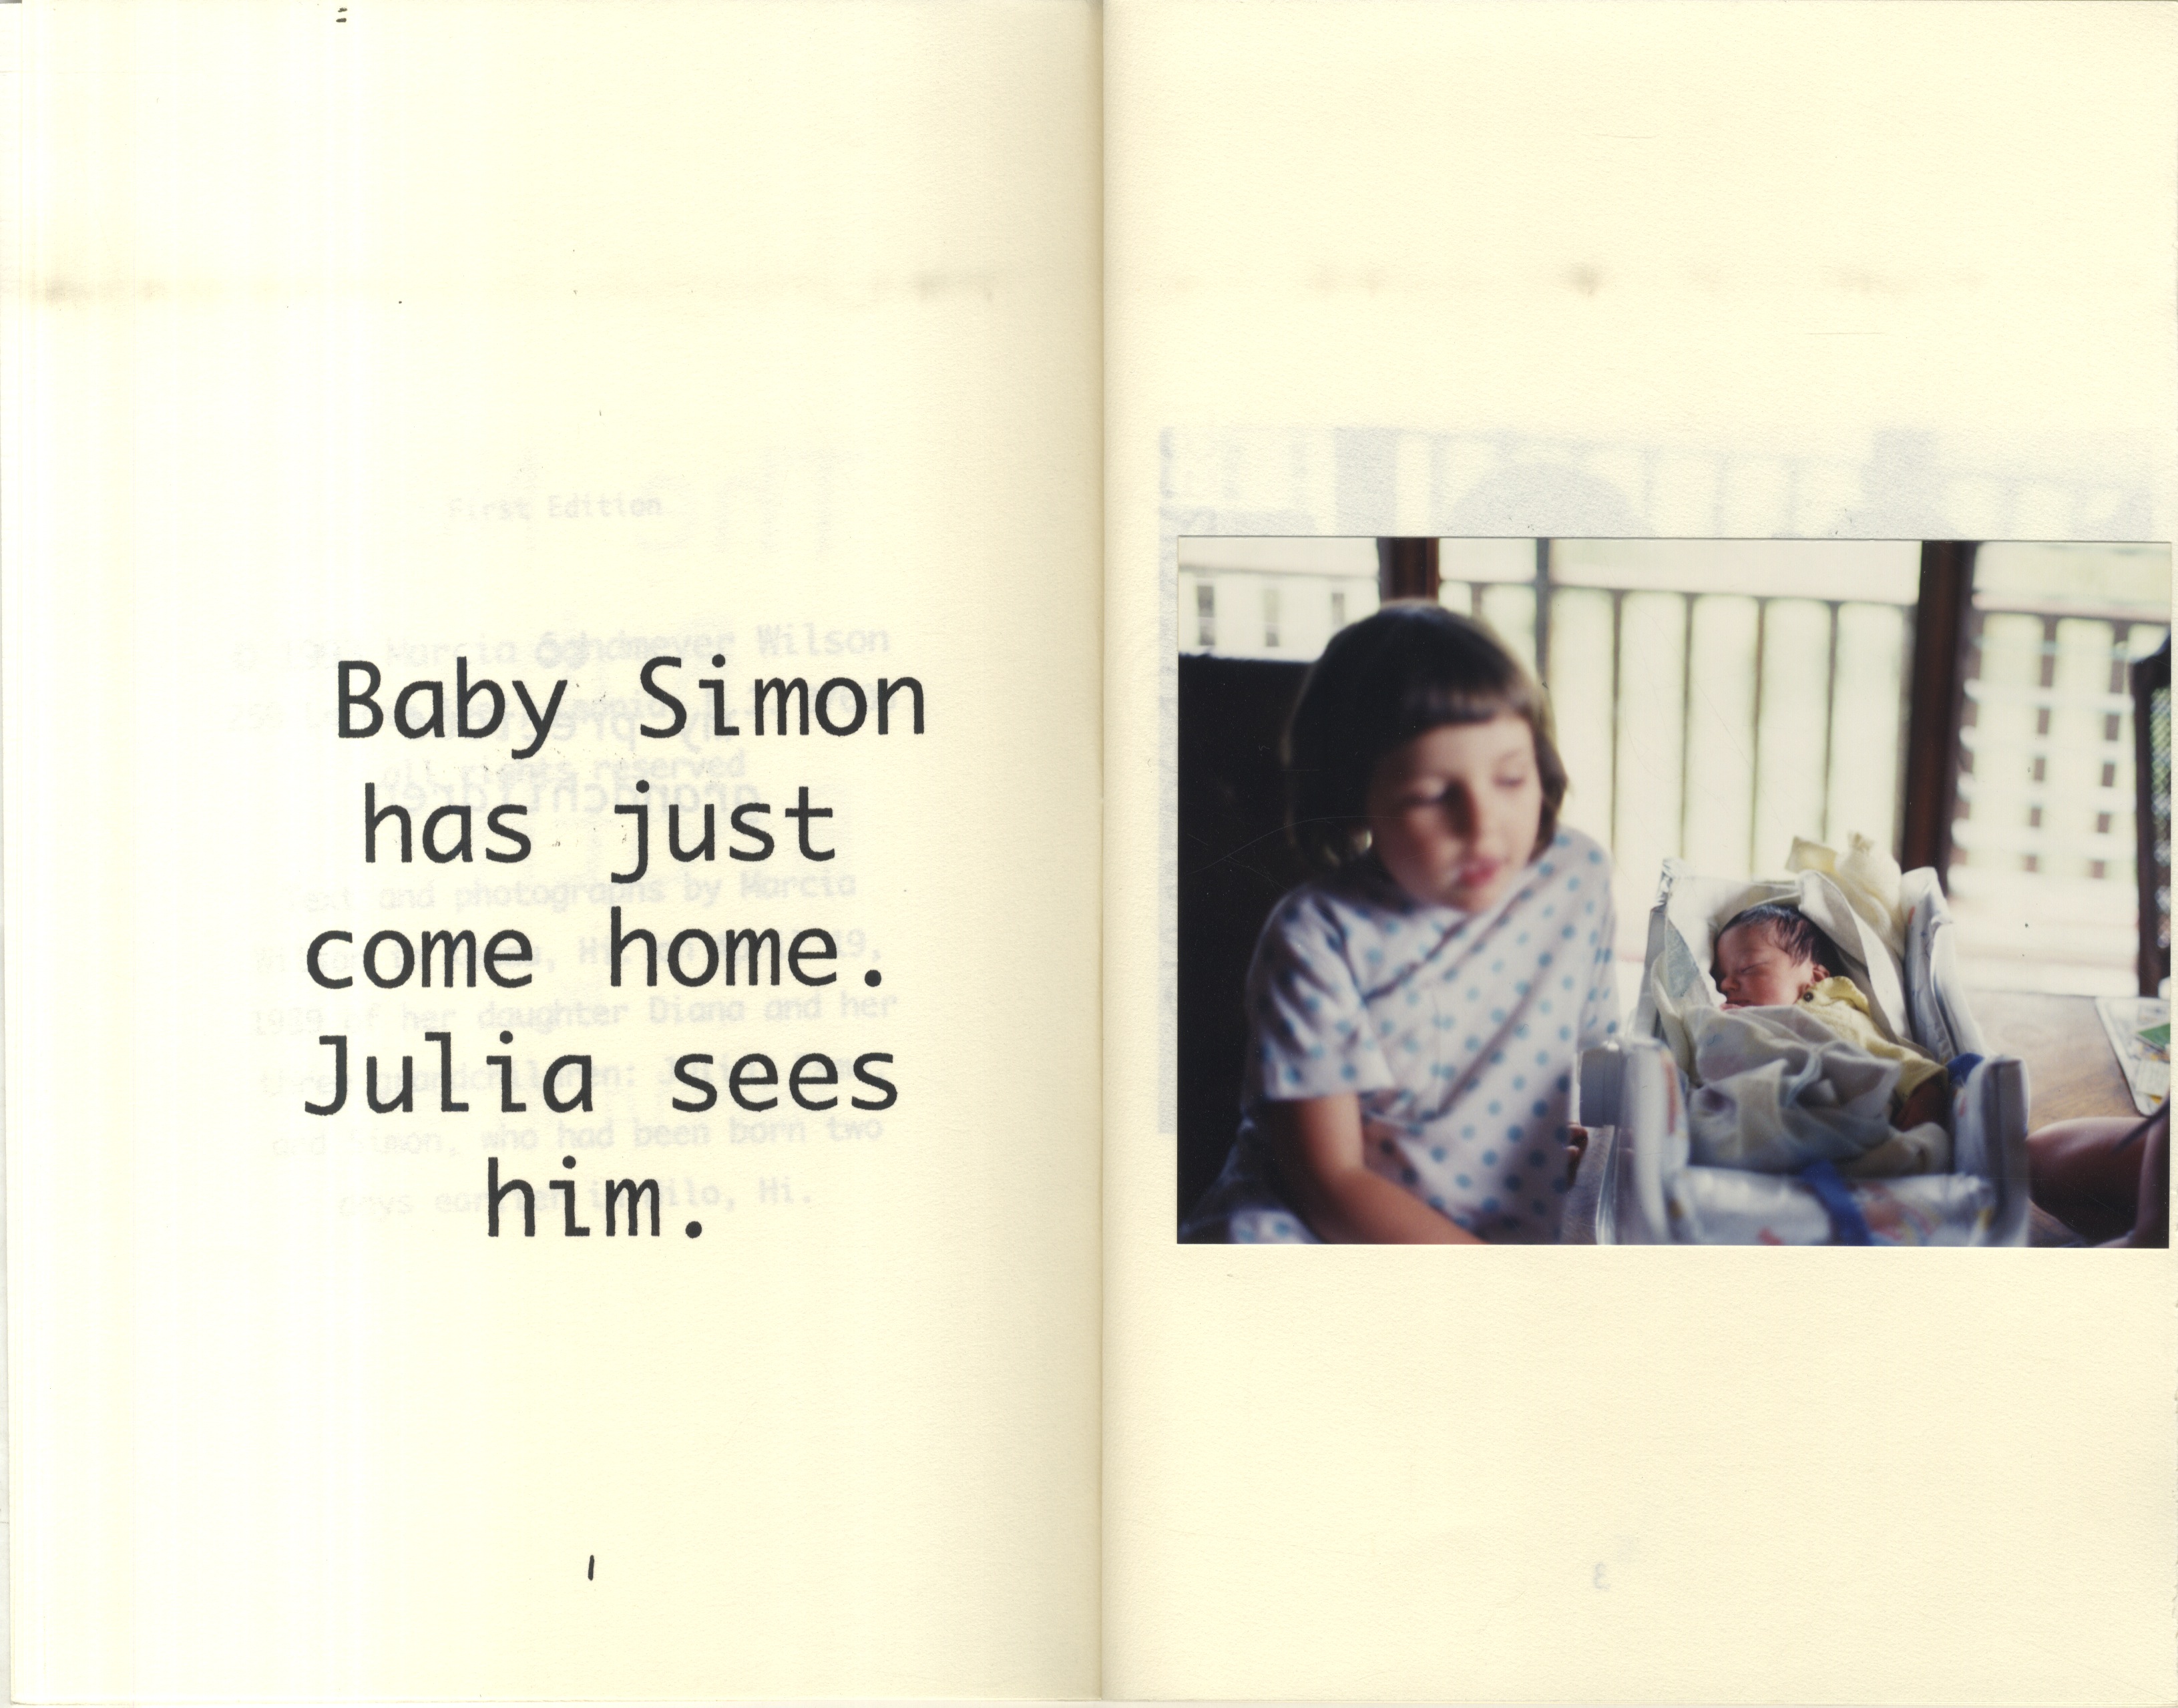 Pages from The new baby brother by Marcia Sandmeyer Wilson